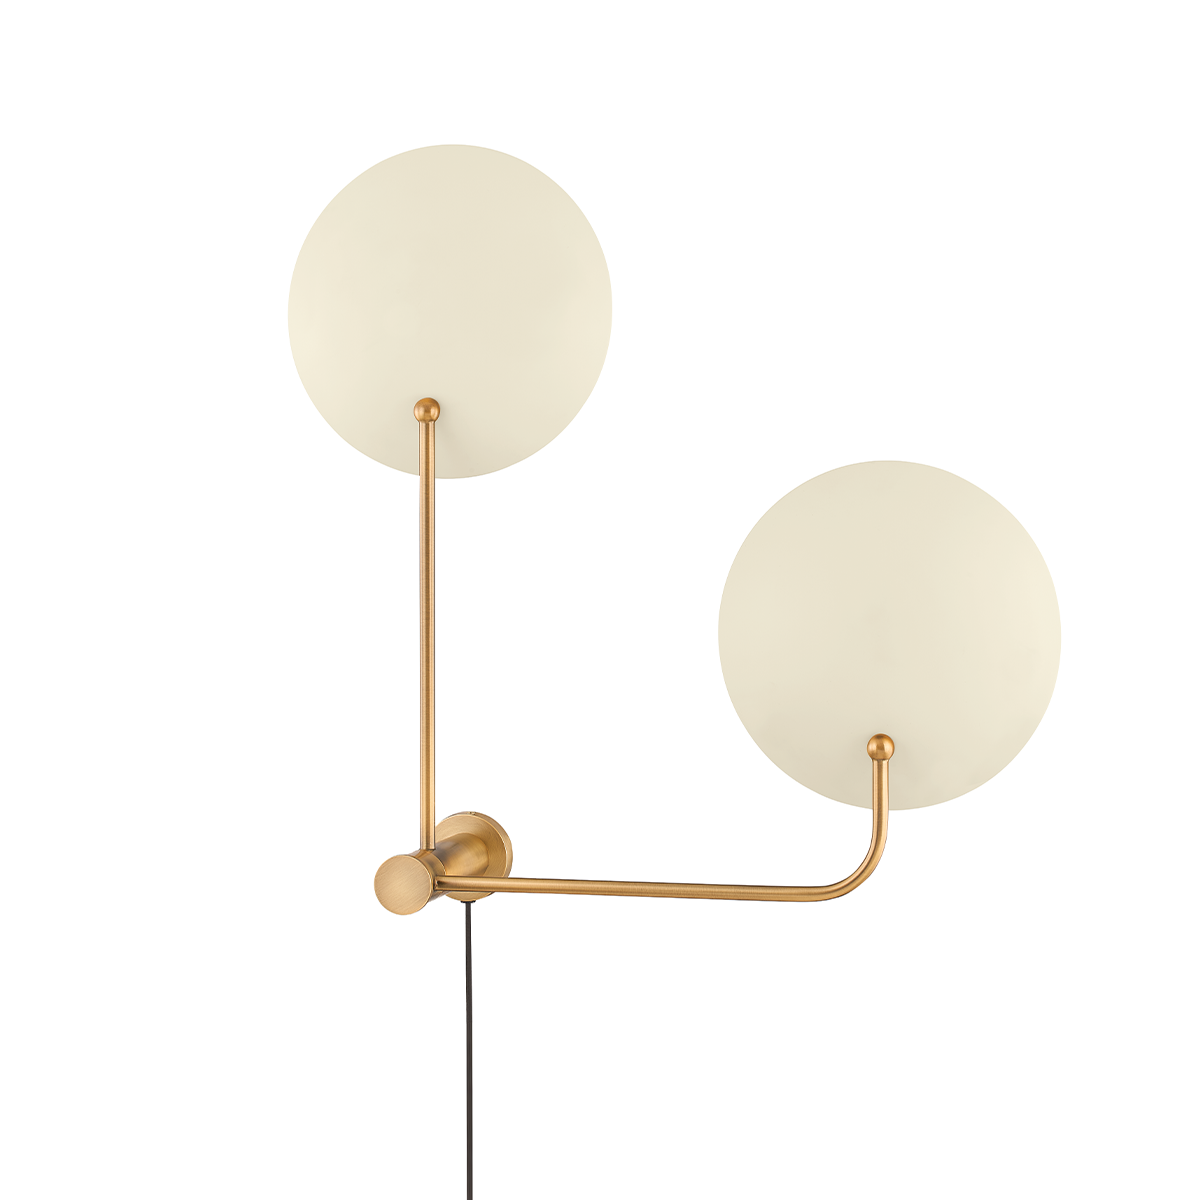 Patina Brass Rod with Circular Shade Plug In Adjustable Wall Sconce